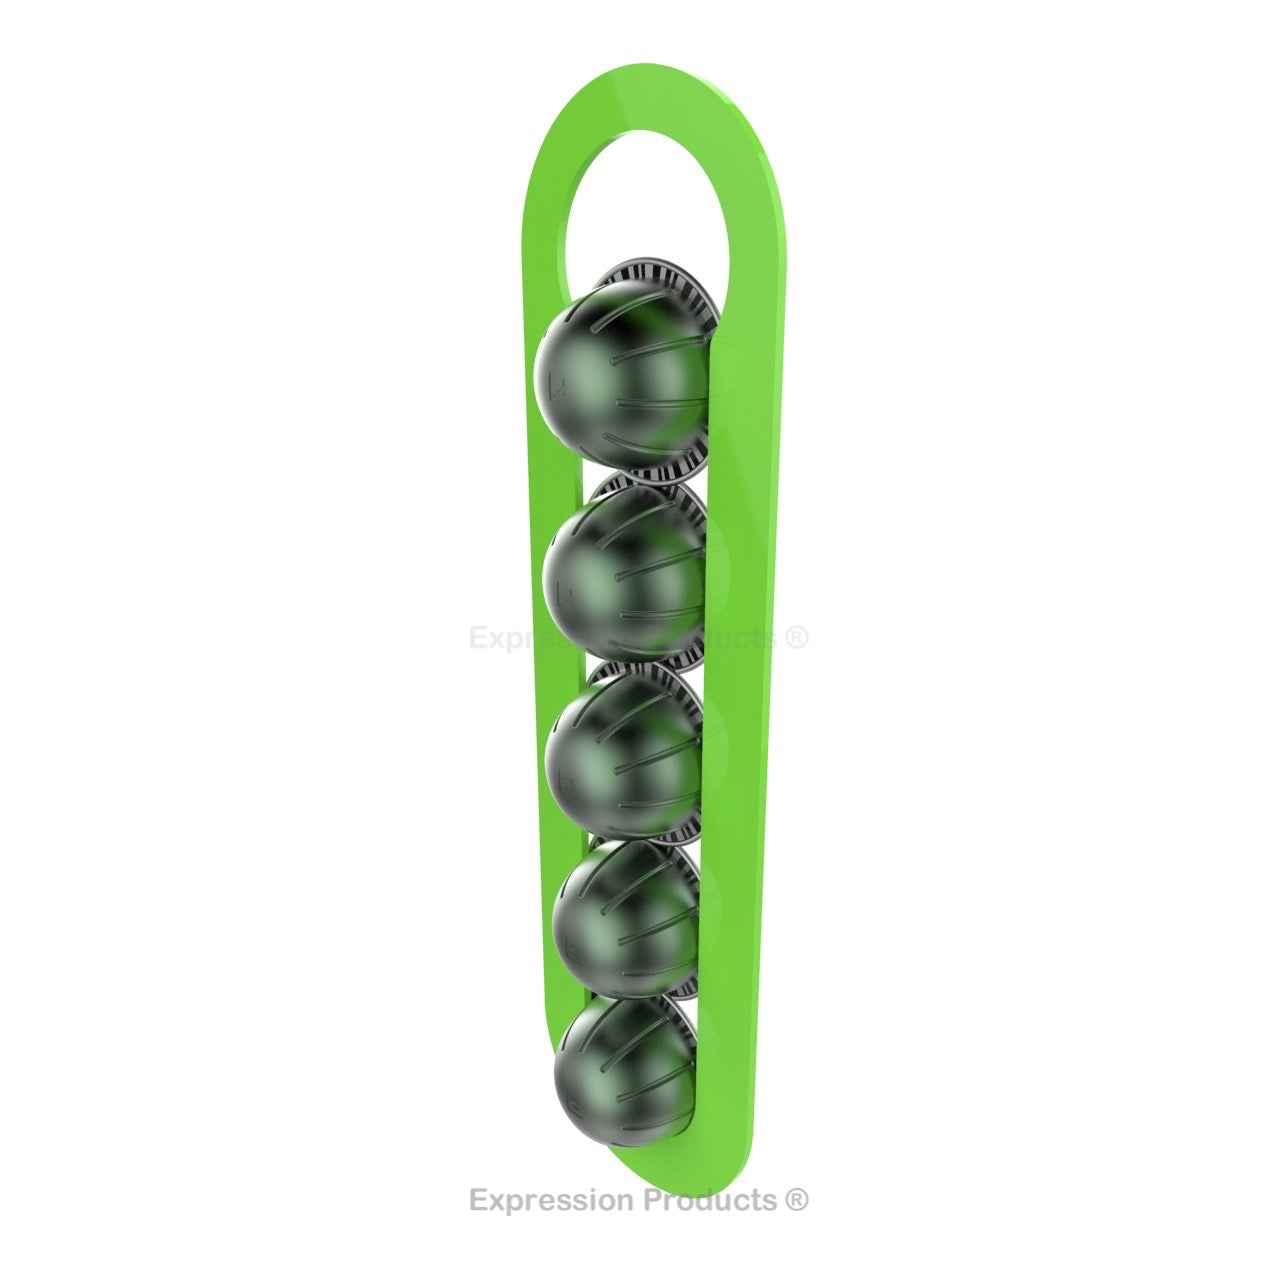 Magnetic Nespresso Vertuo capsule holder shown in lime holding 5 pods